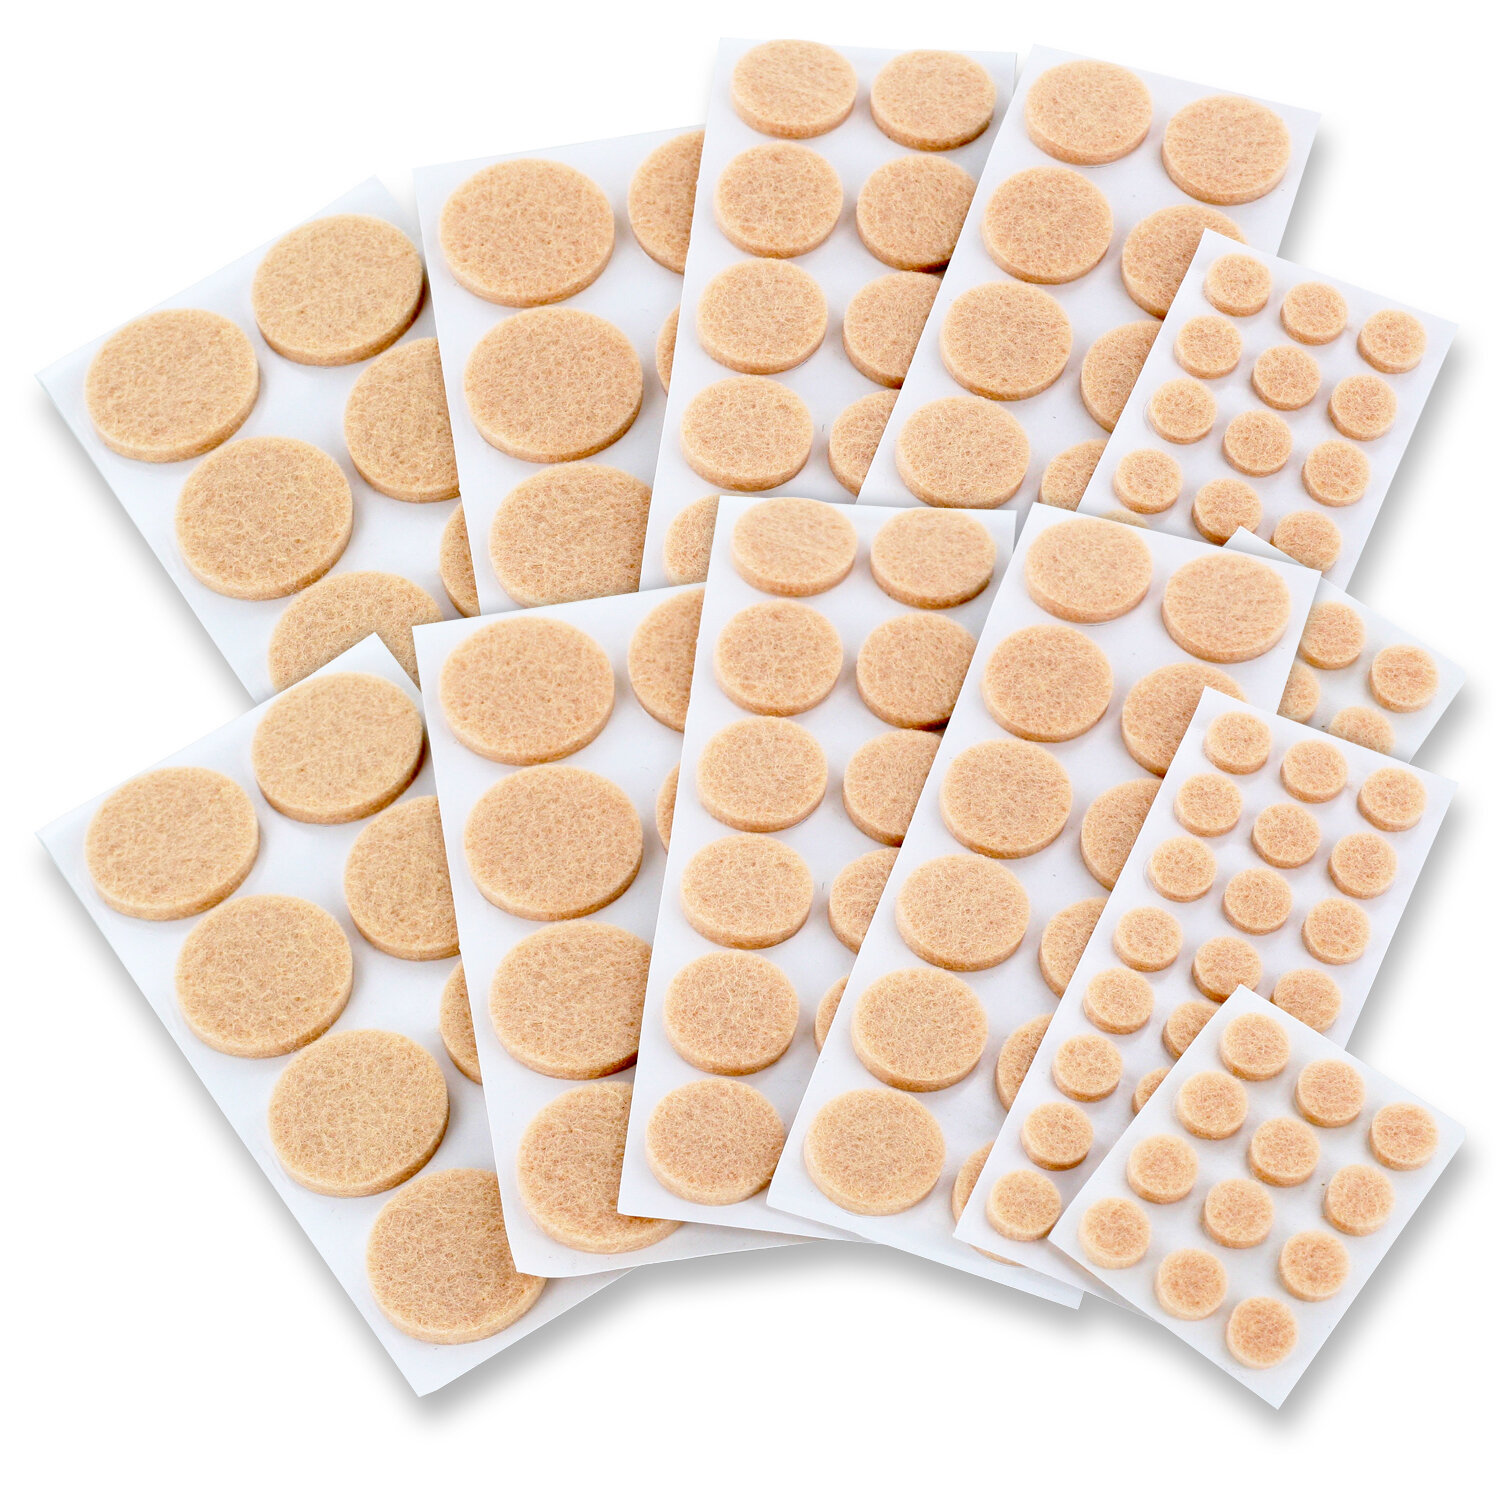 24 Felt Chair Pads for Hardwood Floors 4/5" Details about   Screw-On Felt Pads by X-Protector 